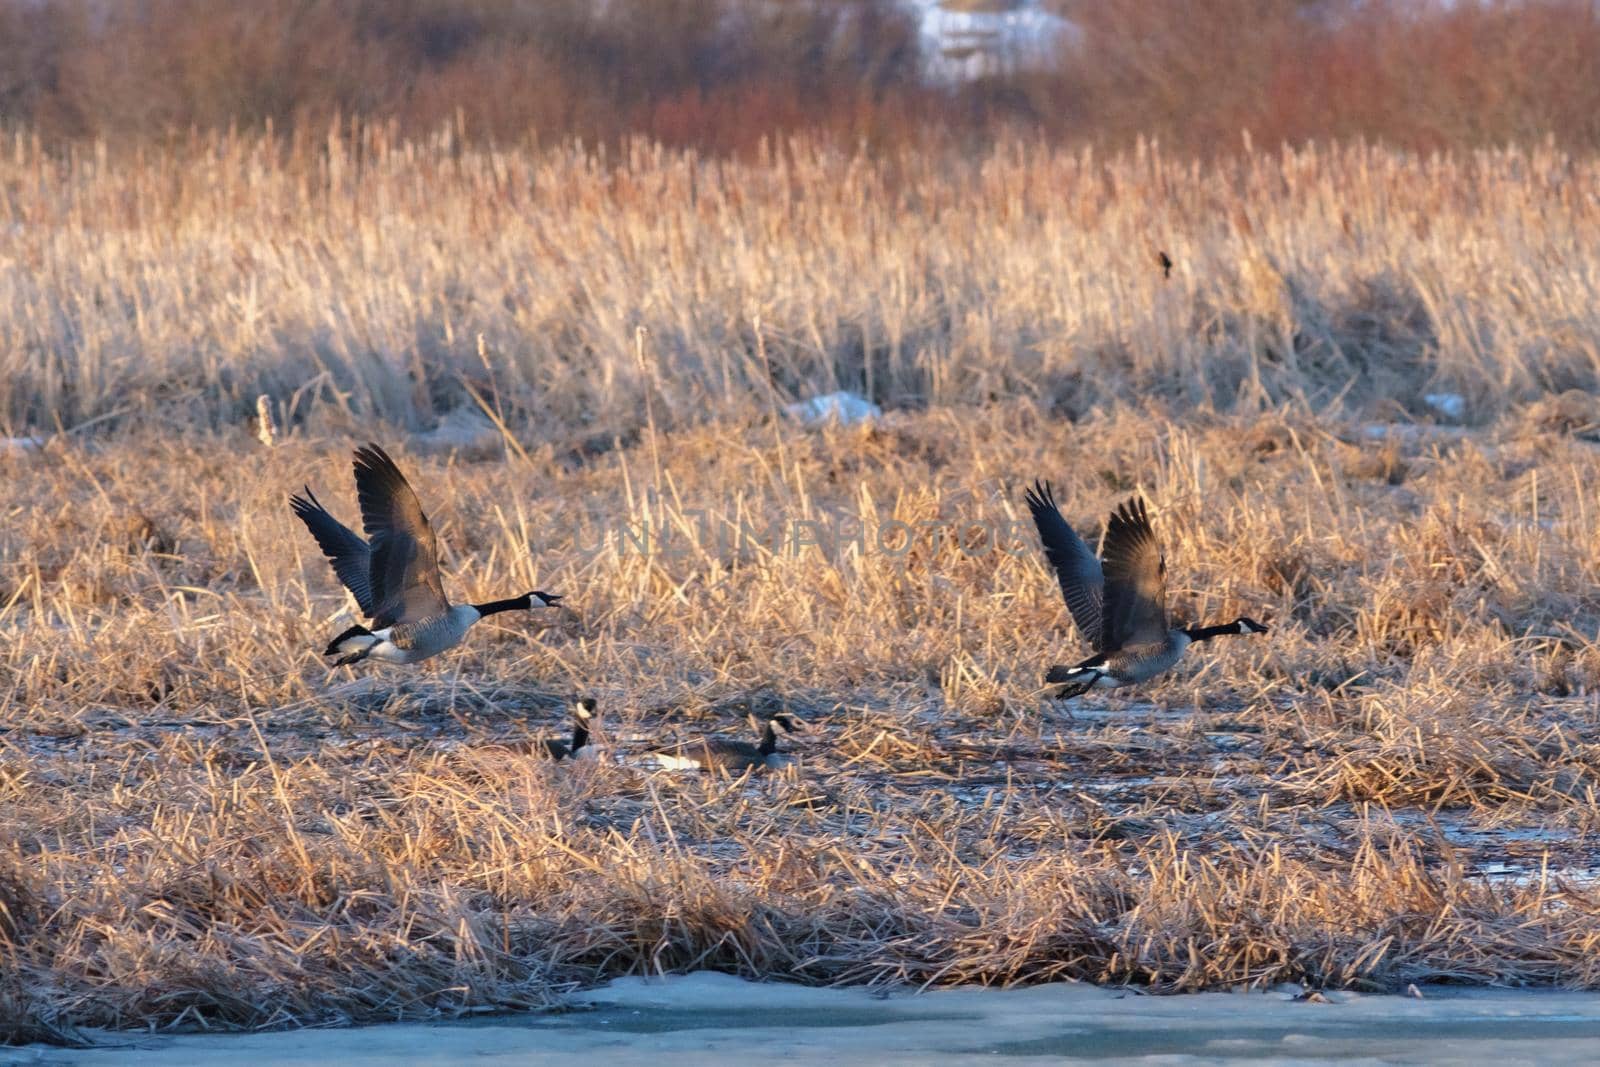 Two Canada geese are flying low through a marsh, with two others resting in the icy waters behind them.